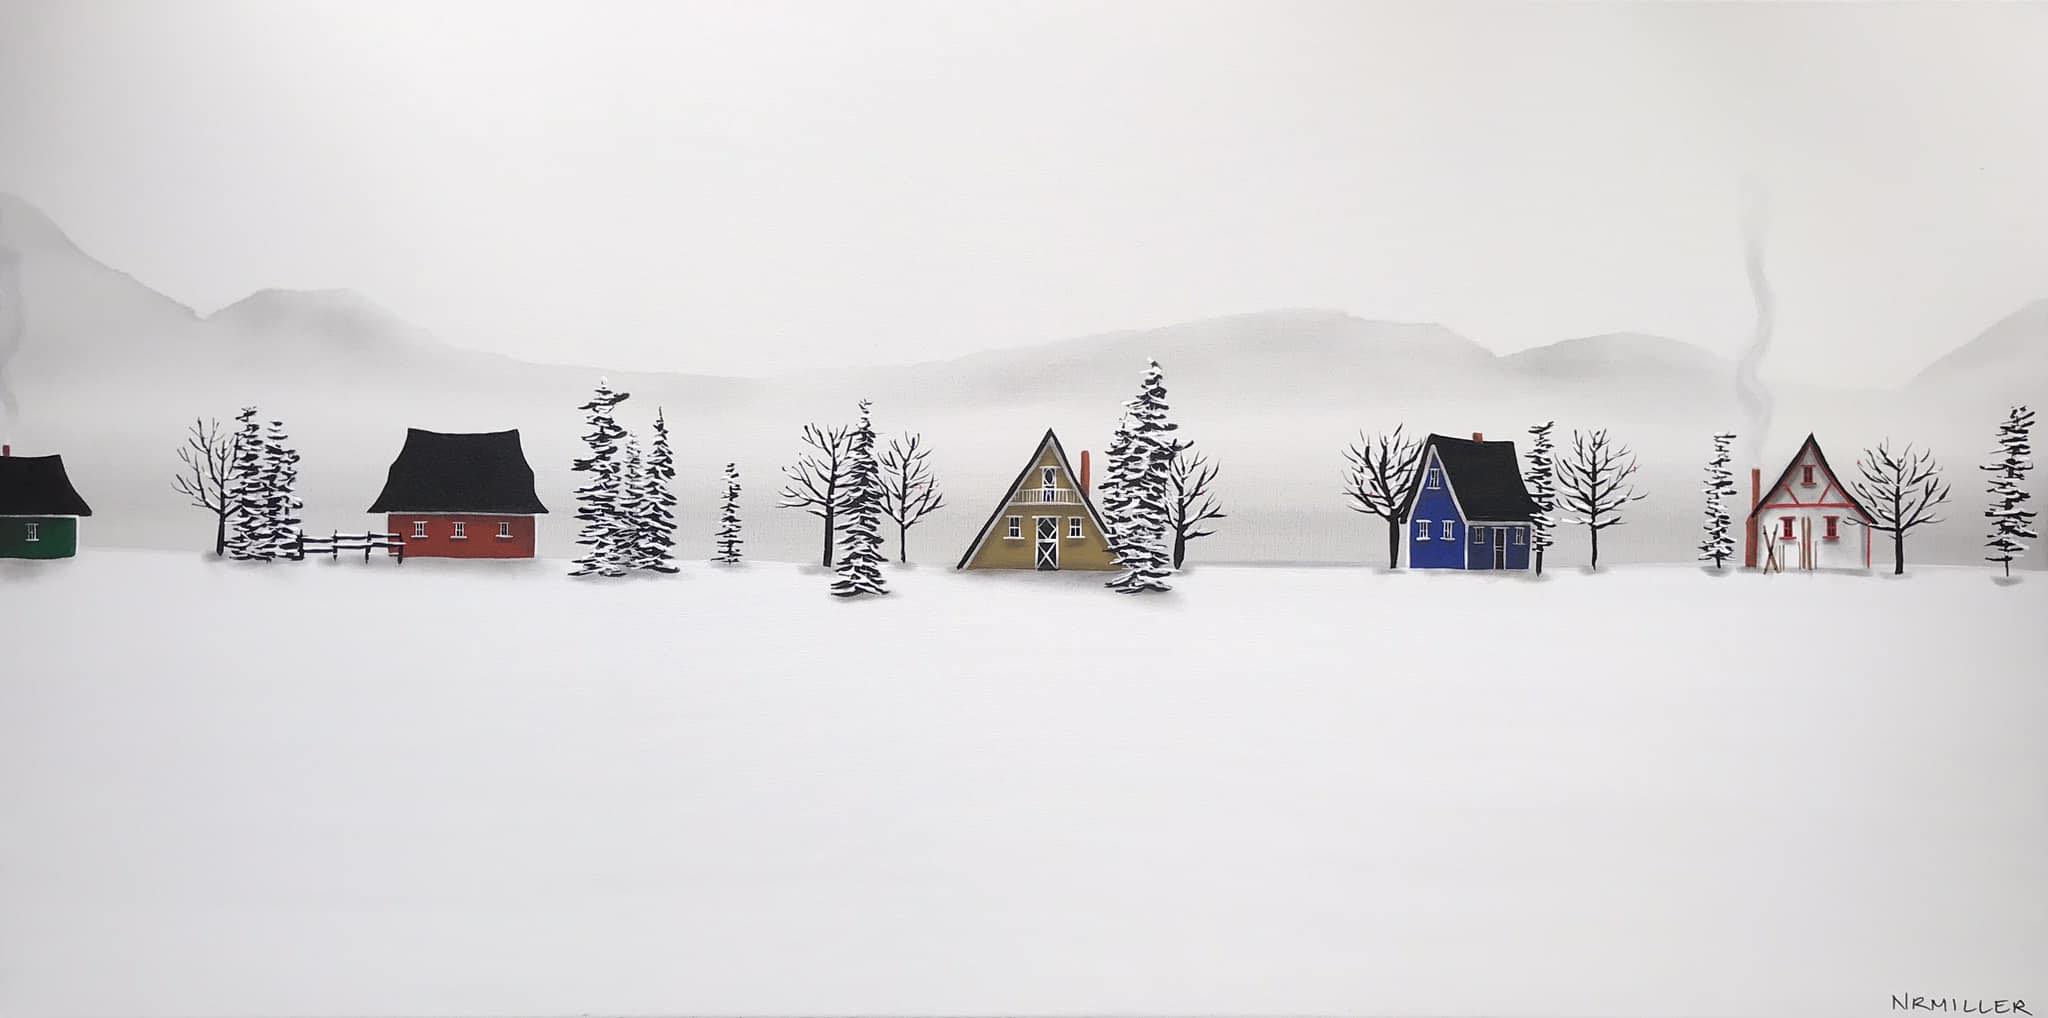 Our Winter Dens, mixed media winter landscape by Natasha Miller | Effusion Art Gallery + Cast Glass Studio, Invermere BC